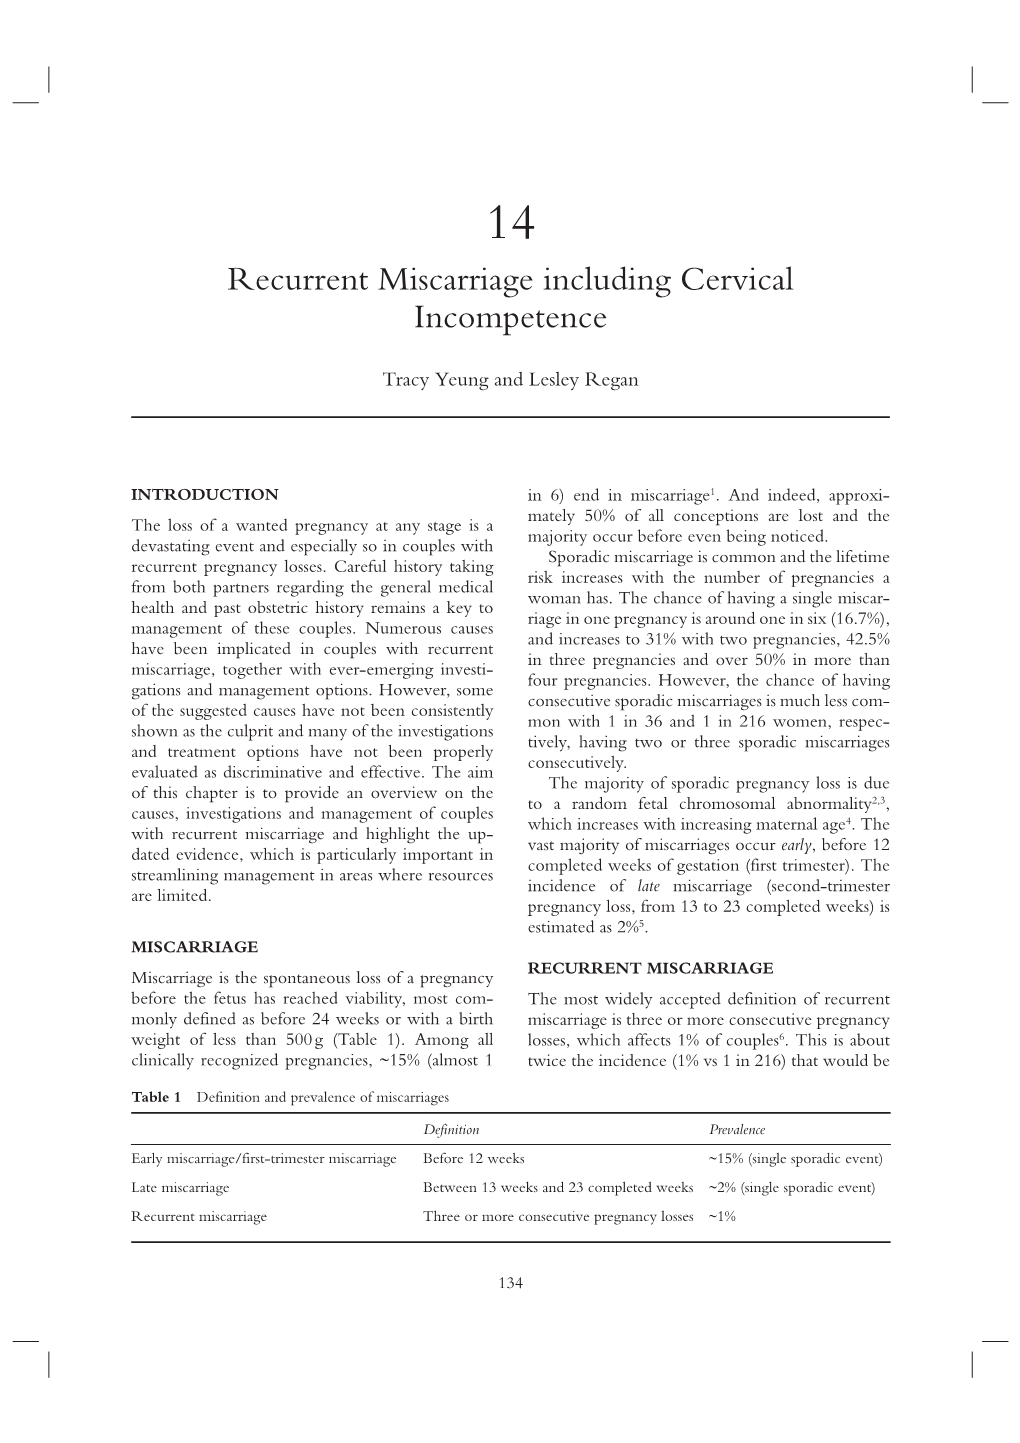 Recurrent Miscarriage Including Cervical Incompetence